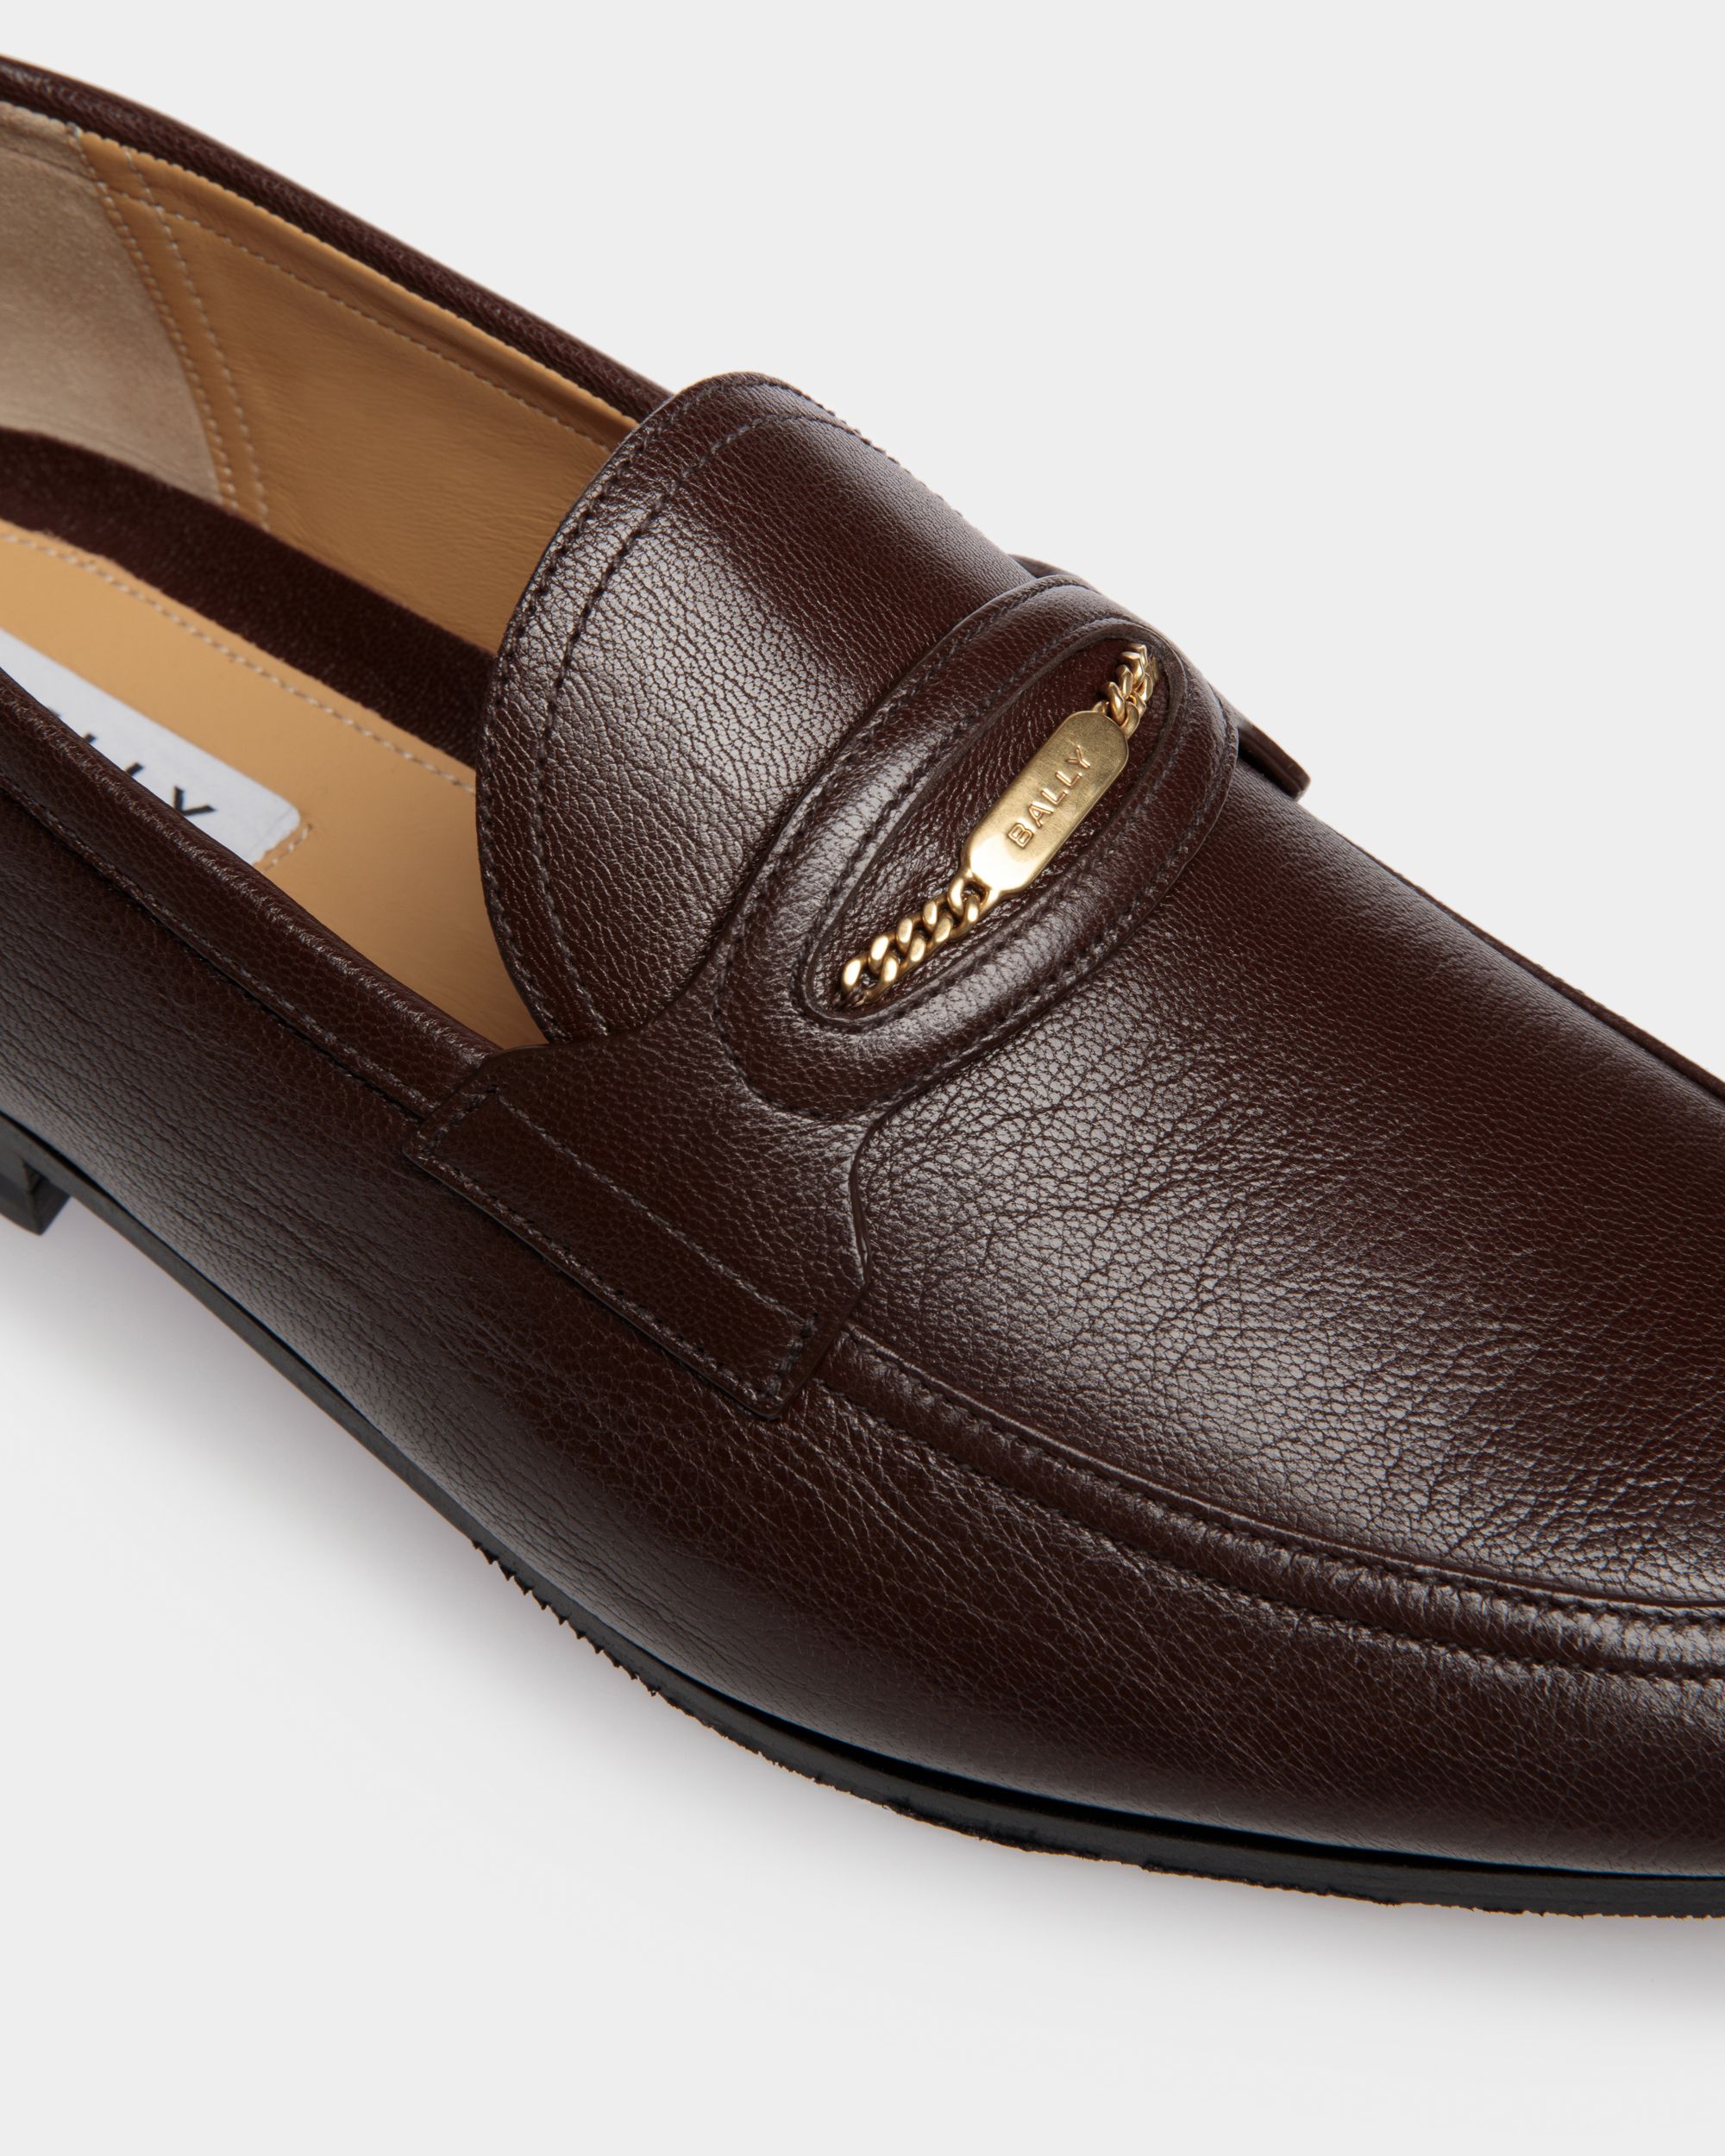 Plume | Men's Loafer in Brown Grained Leather | Bally | Still Life Detail